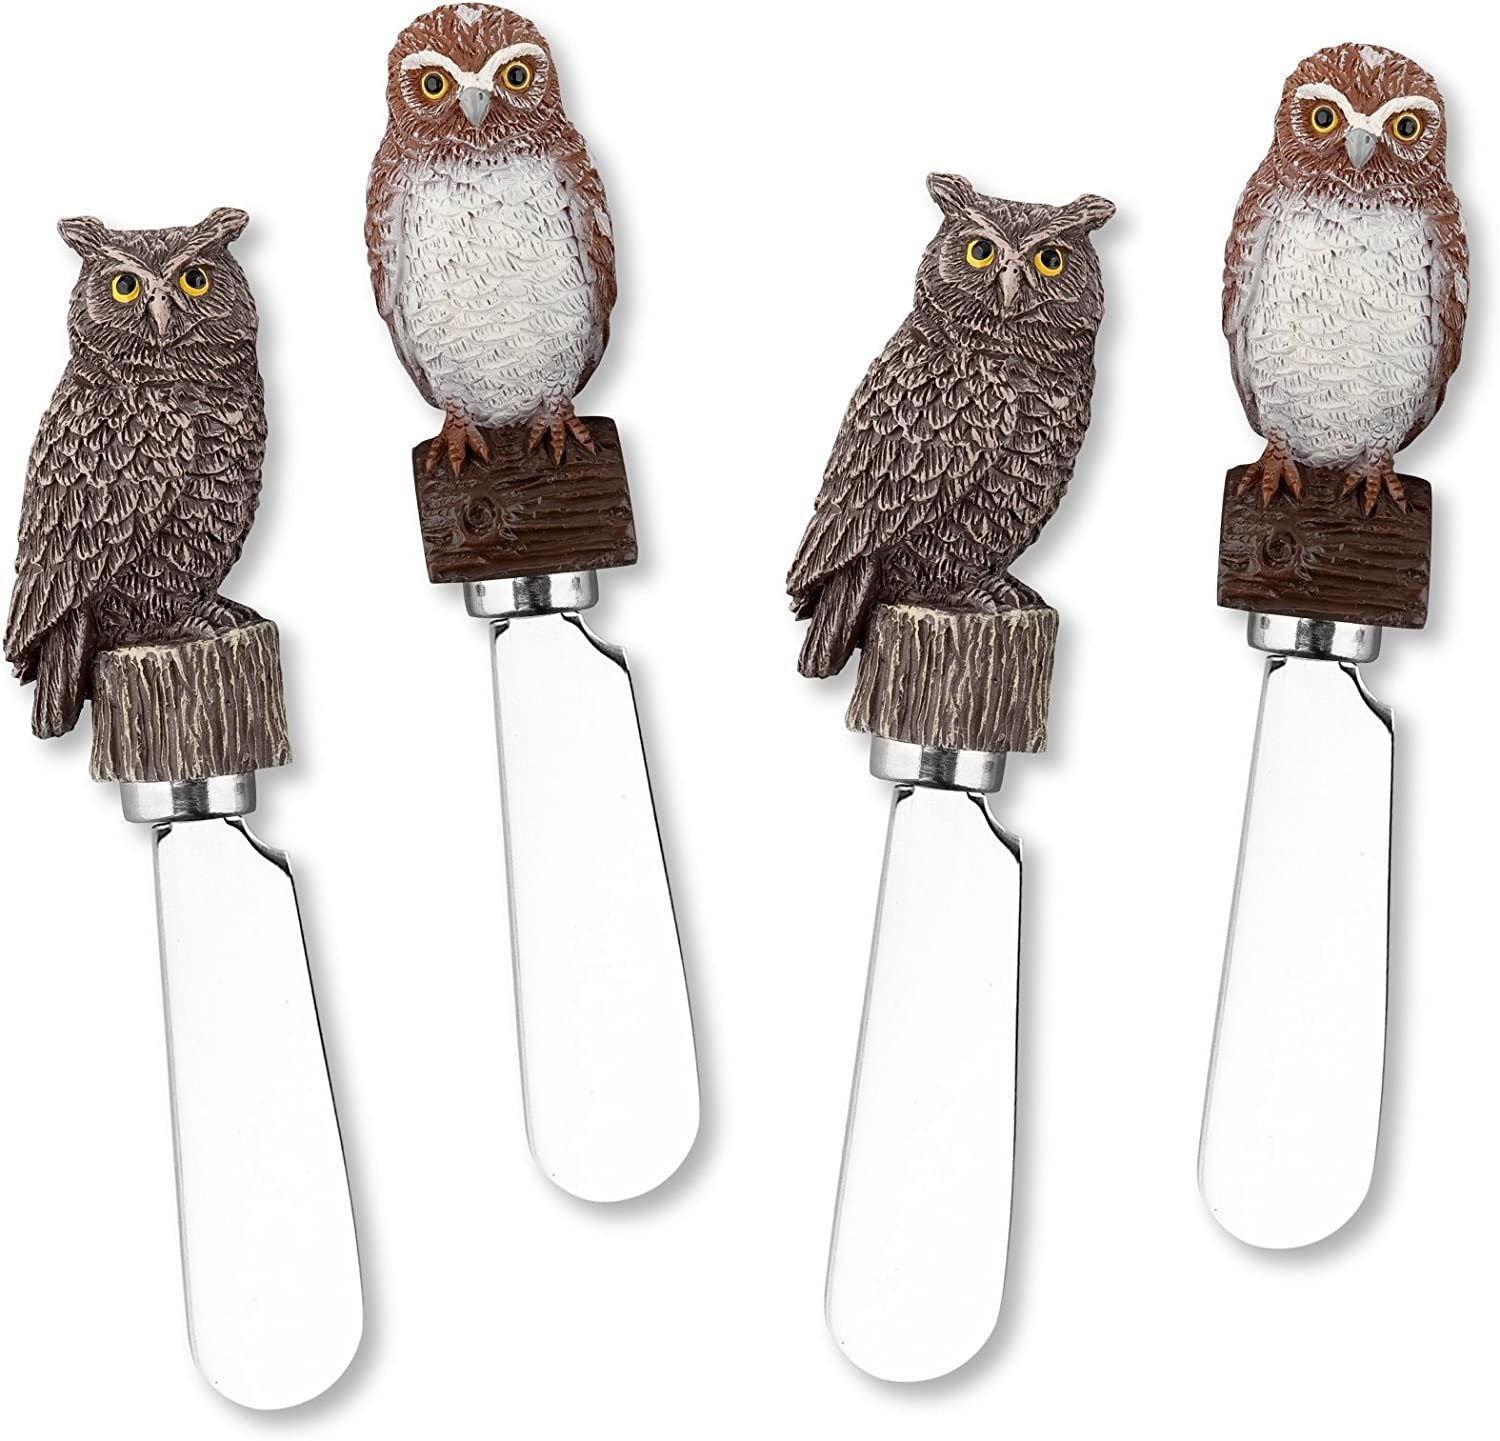 Supreme Housewares Owls Resin Spreader S/4, 5″, Brown Import To Shop ×Product customization General Description Gallery Reviews